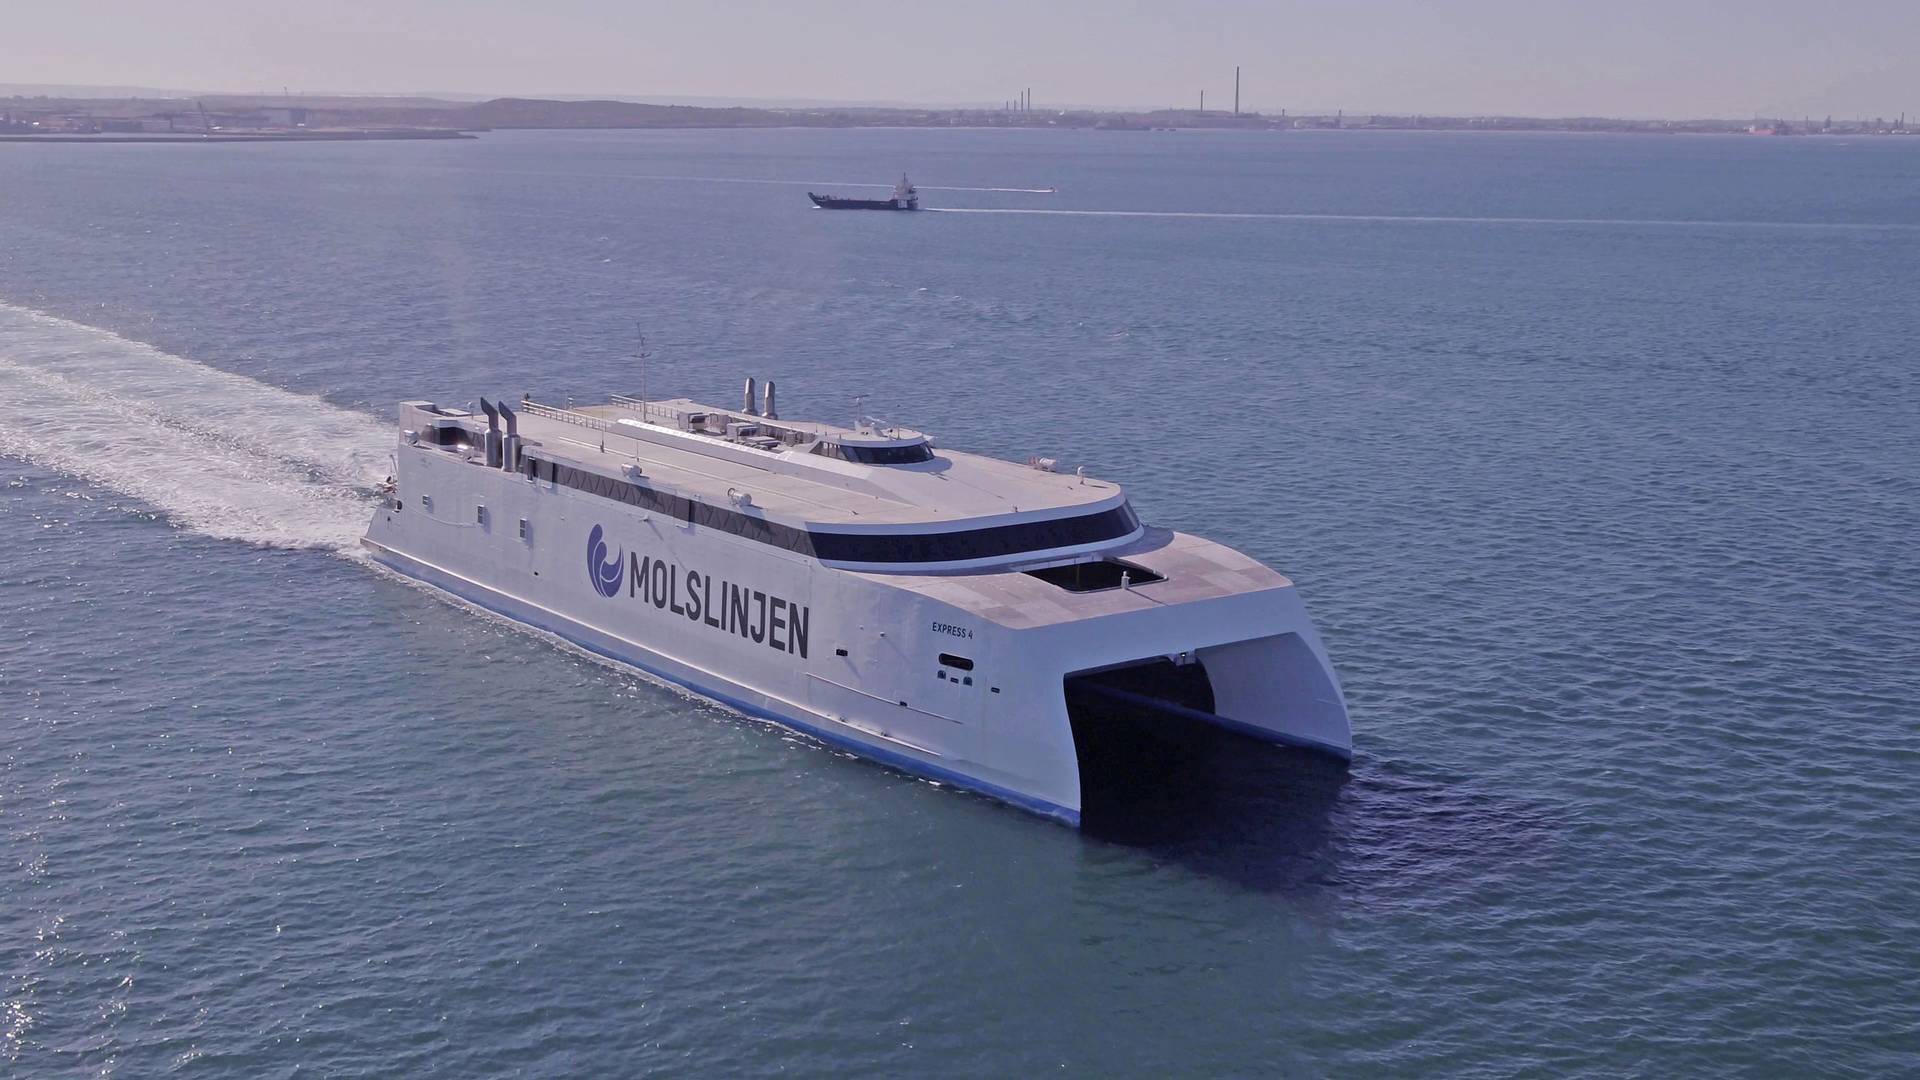 Danish shipping company tests flywheel on ferry: “Could be extraordinary”